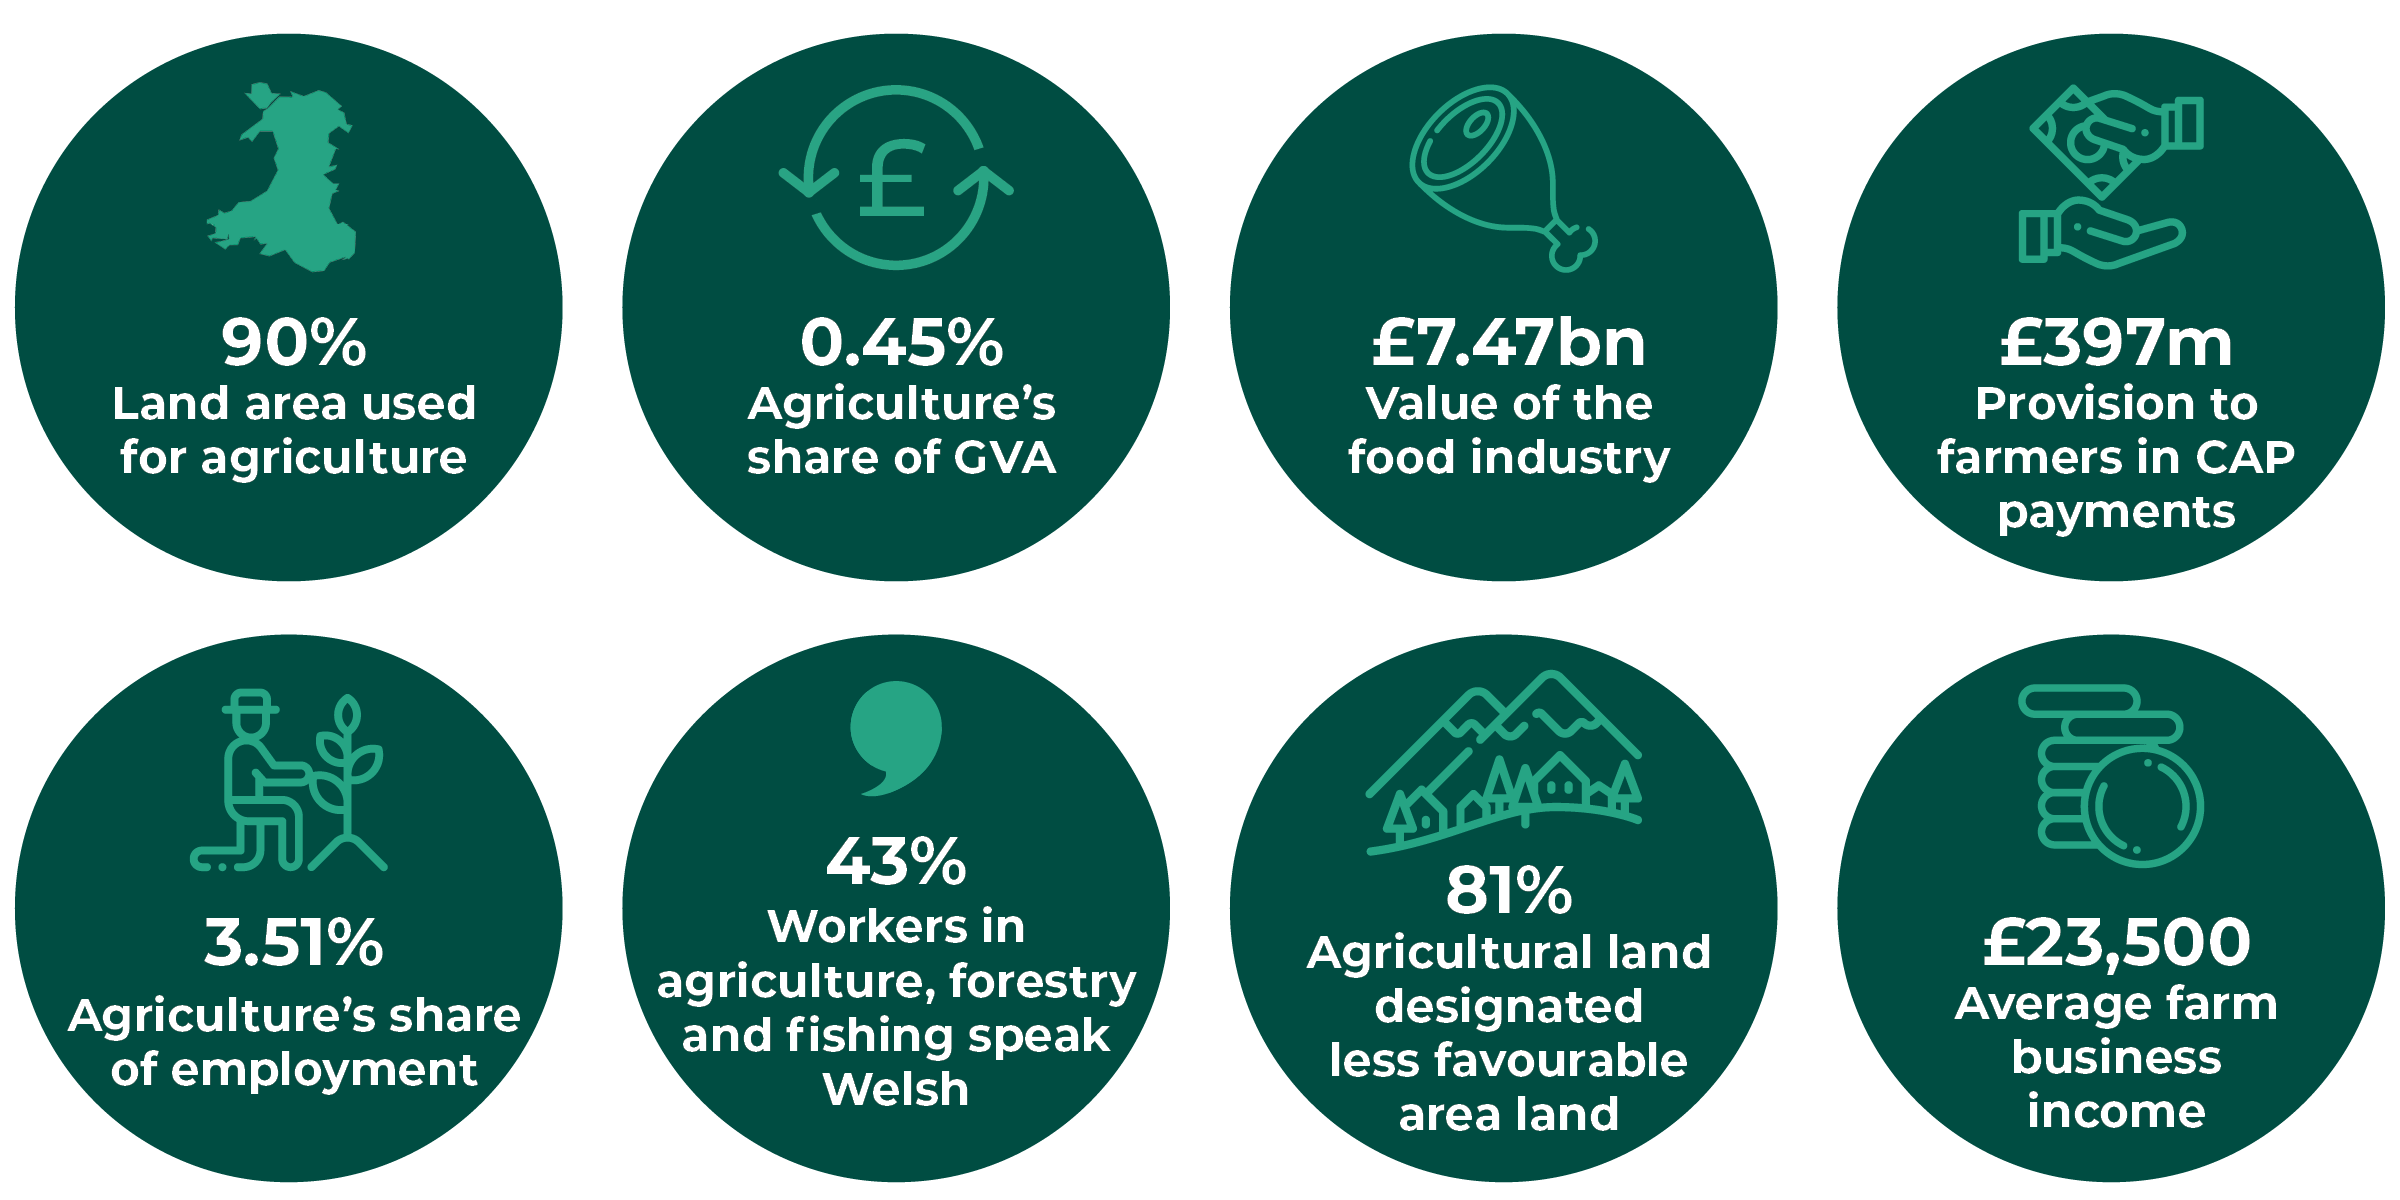 Welsh farming statistics- 90% land area used for agriculture; 0.45% agriculture’s share of GVA; £7.47bn value of the food industry; £397m provided to farmers in CAP payments; 3.51% agriculture’s share of employment; 43% workers speak Welsh within the agriculture, forestry and fishing sector; 81% agricultural land area designated as LFA (less favoured area) land; £23,500 average farm business income.